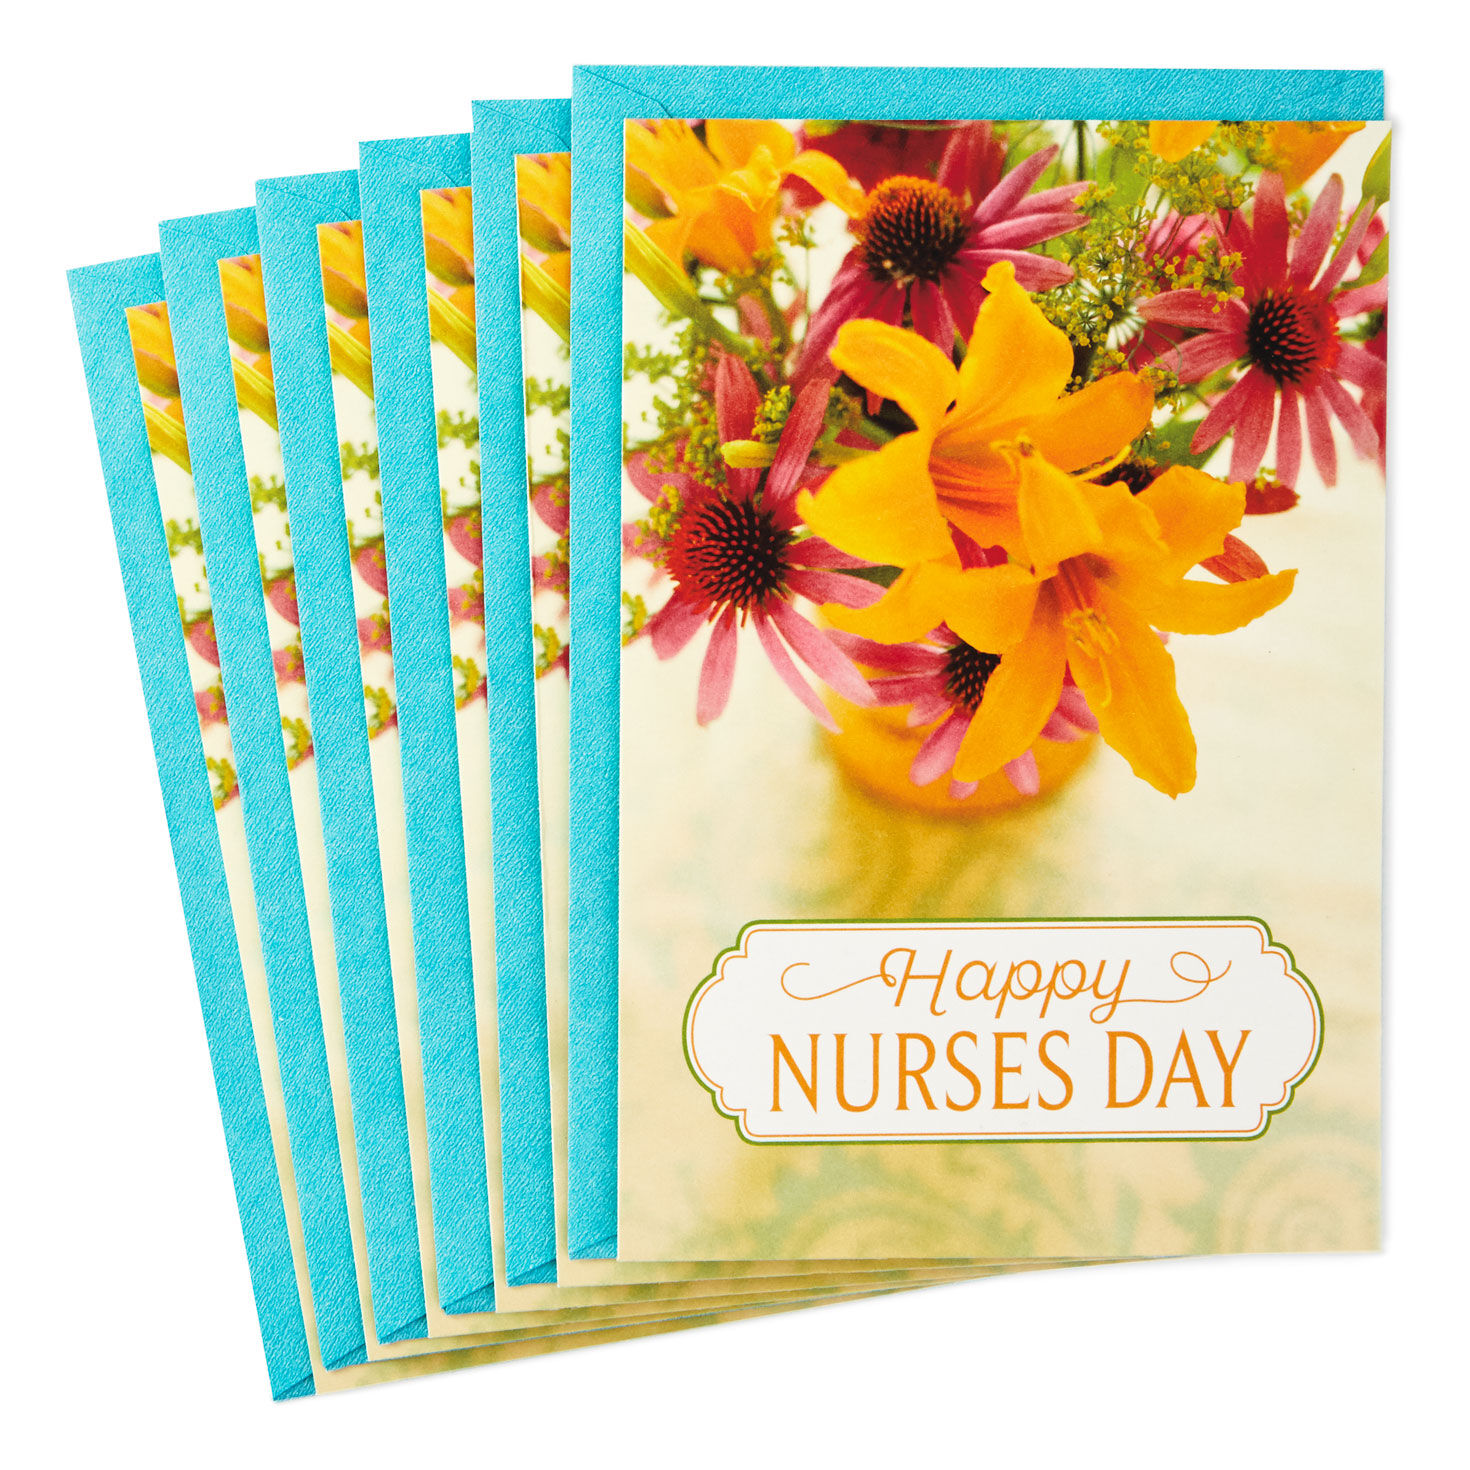 Details about   NURSES DAY CARD HALLMARK FOR ANYONE NEW WITH ENVELOPE 